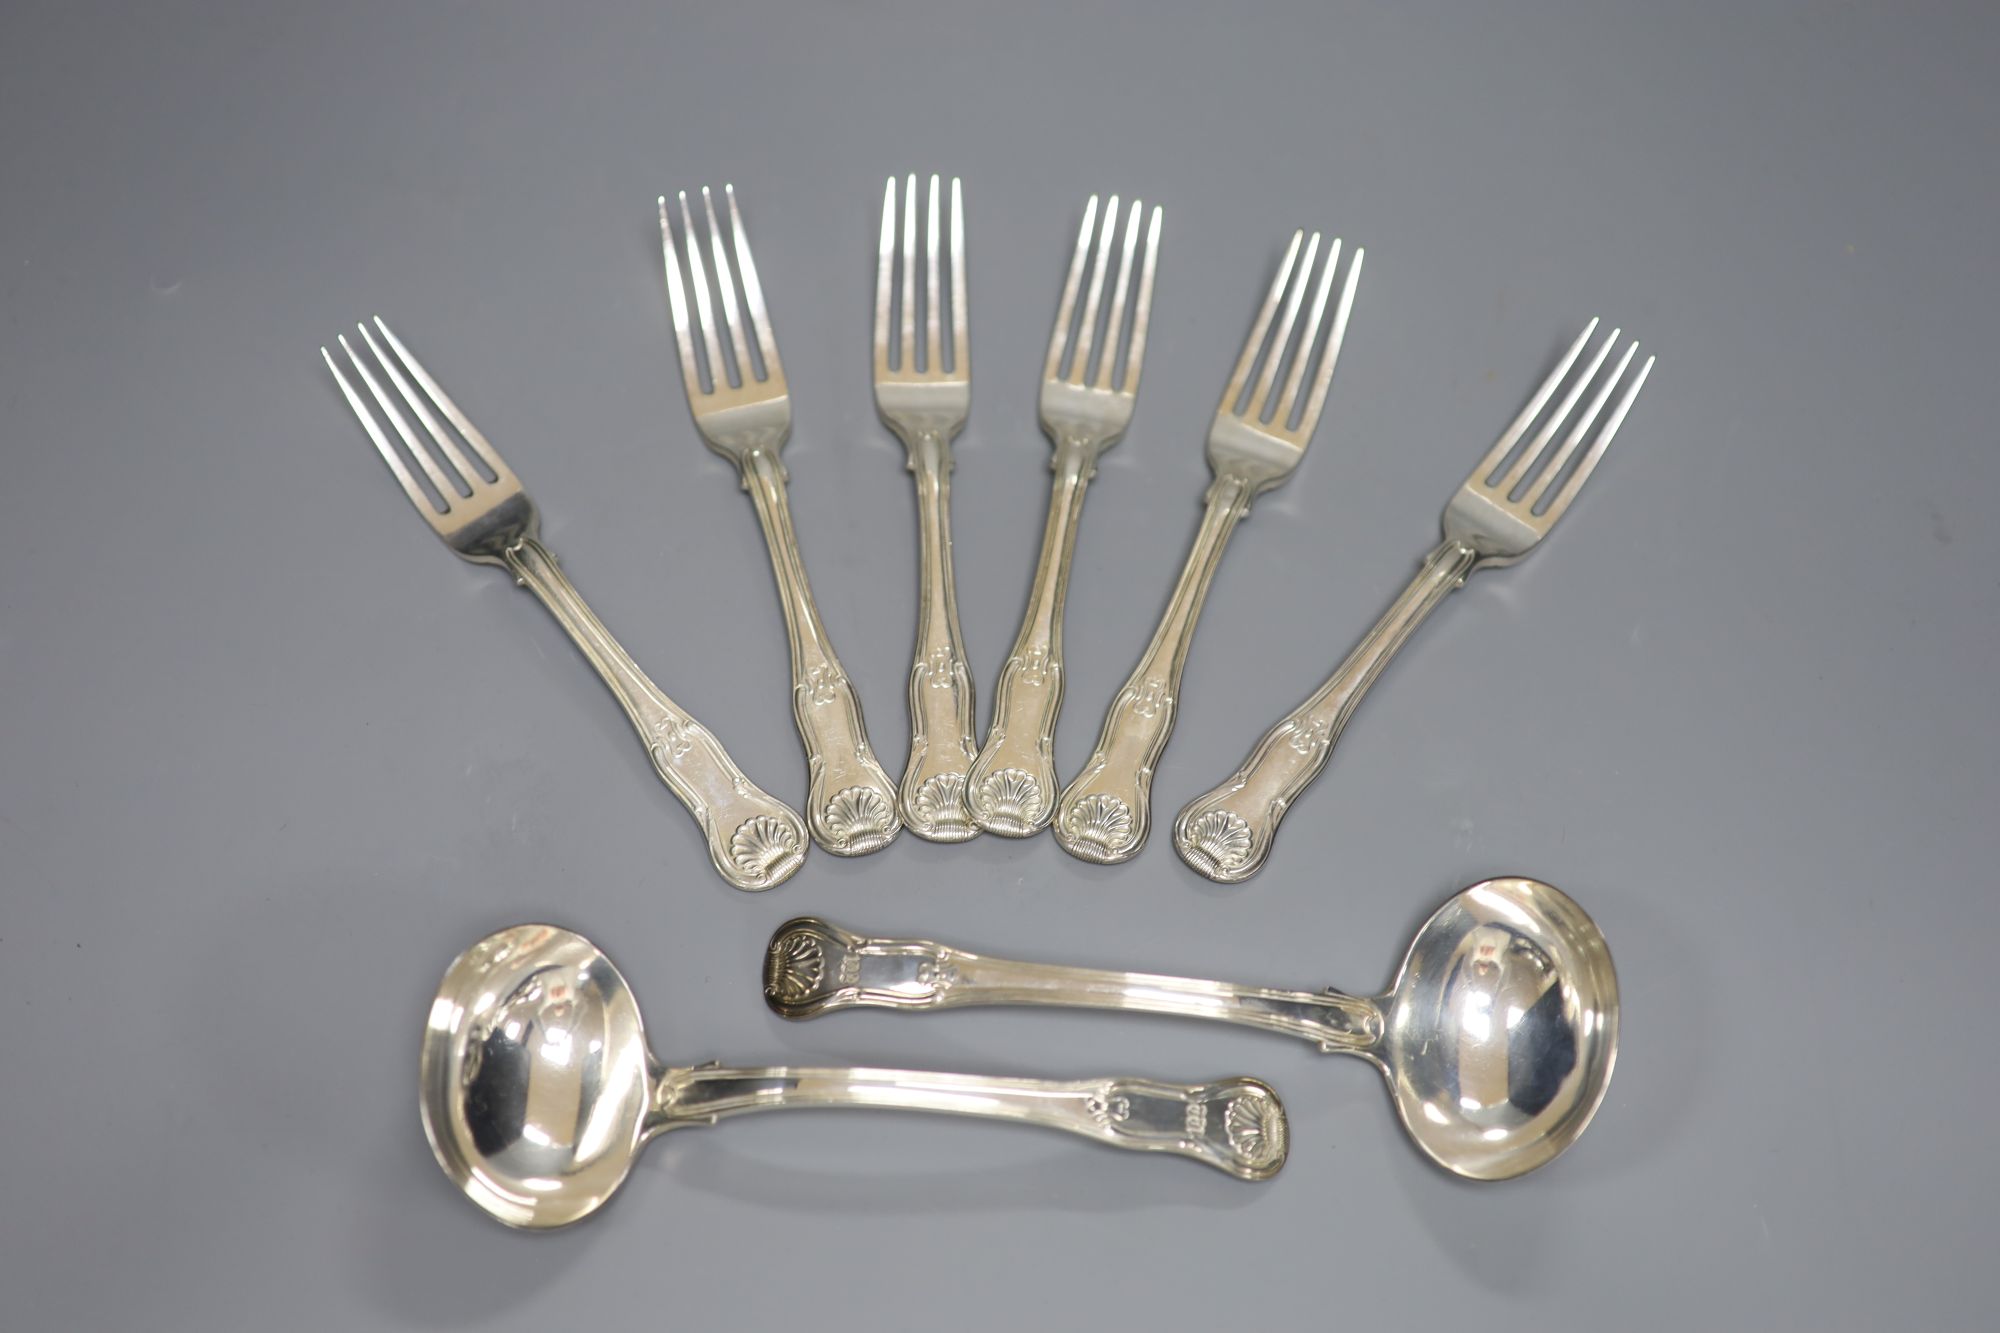 A set of six George III hourglass pattern dessert forks and a pair of sauce ladles, Thomas Wilkes Barker, London, 1818/9 16.8oz.